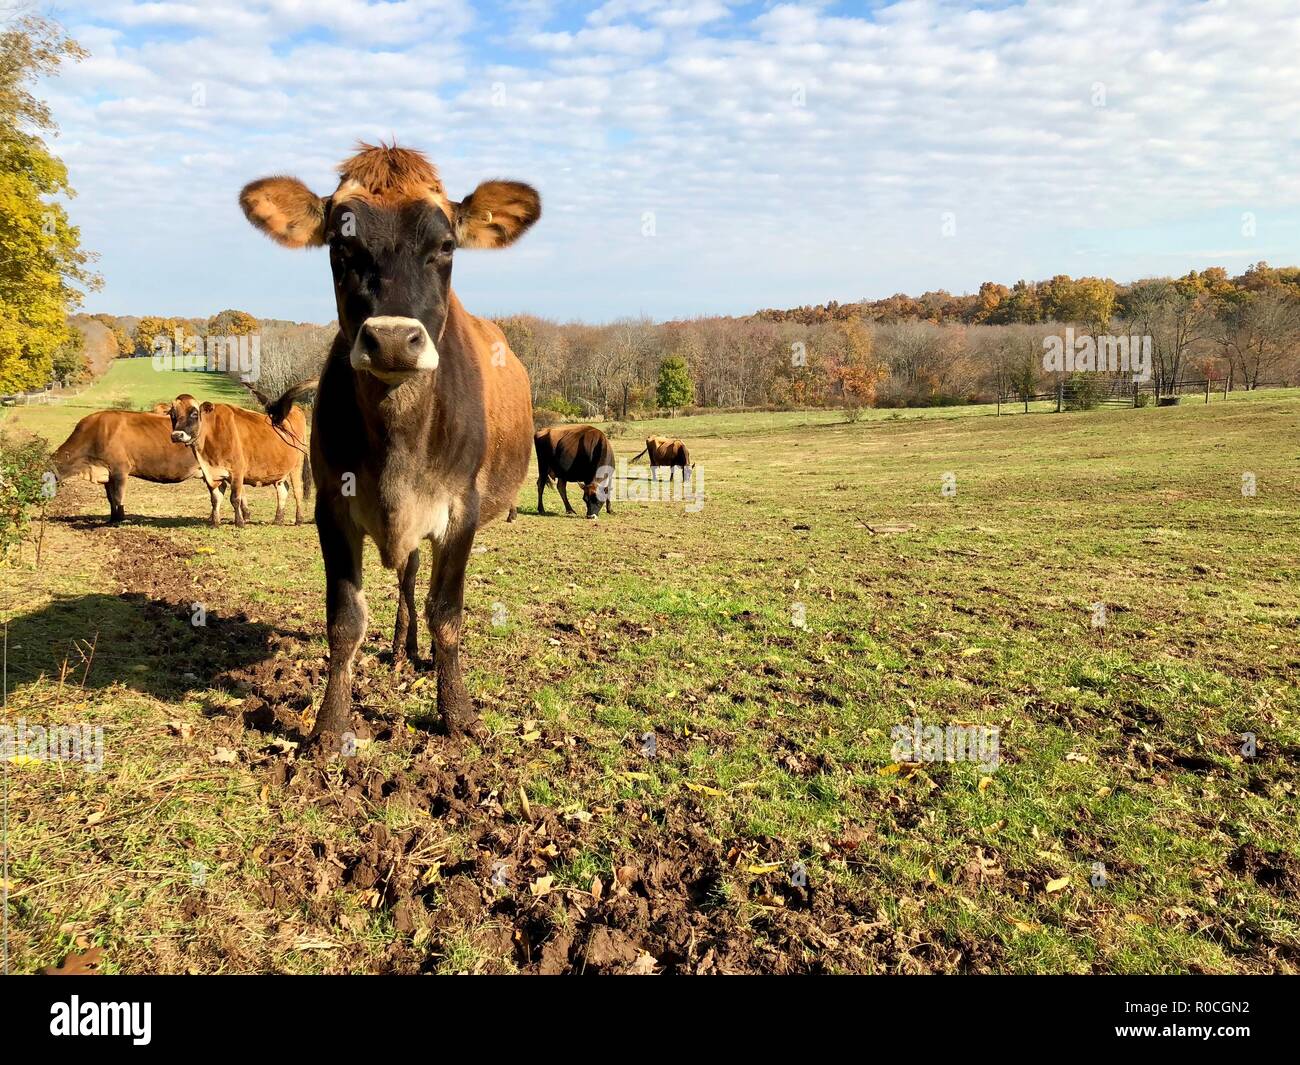 Jersey cow and herd of cows in organic pasture in New England in fall with fall foliage and blue sky Stock Photo